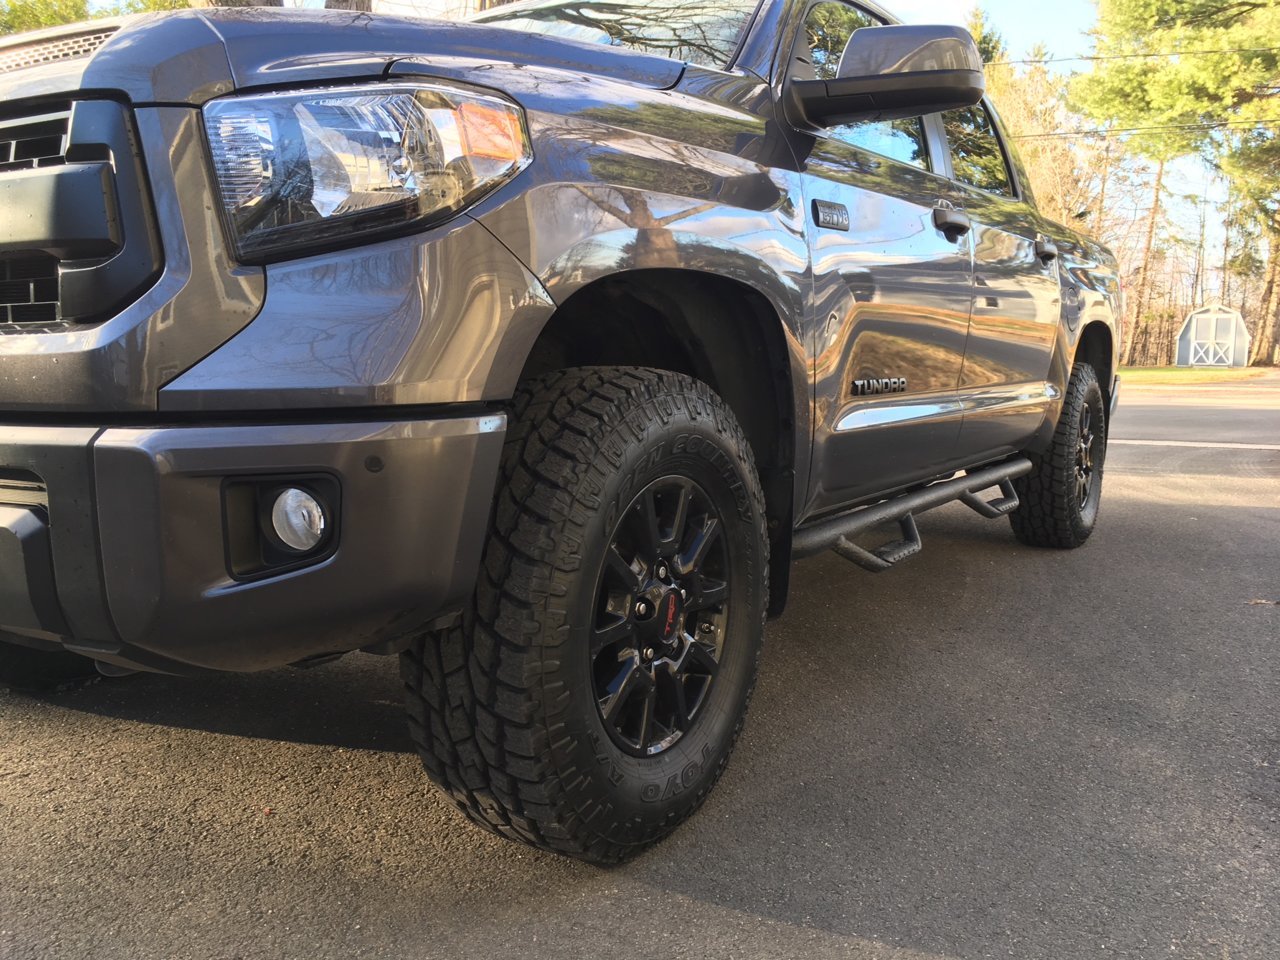 Since there are not a lot of photos of a TRD PRO with the Toyo Open Country...